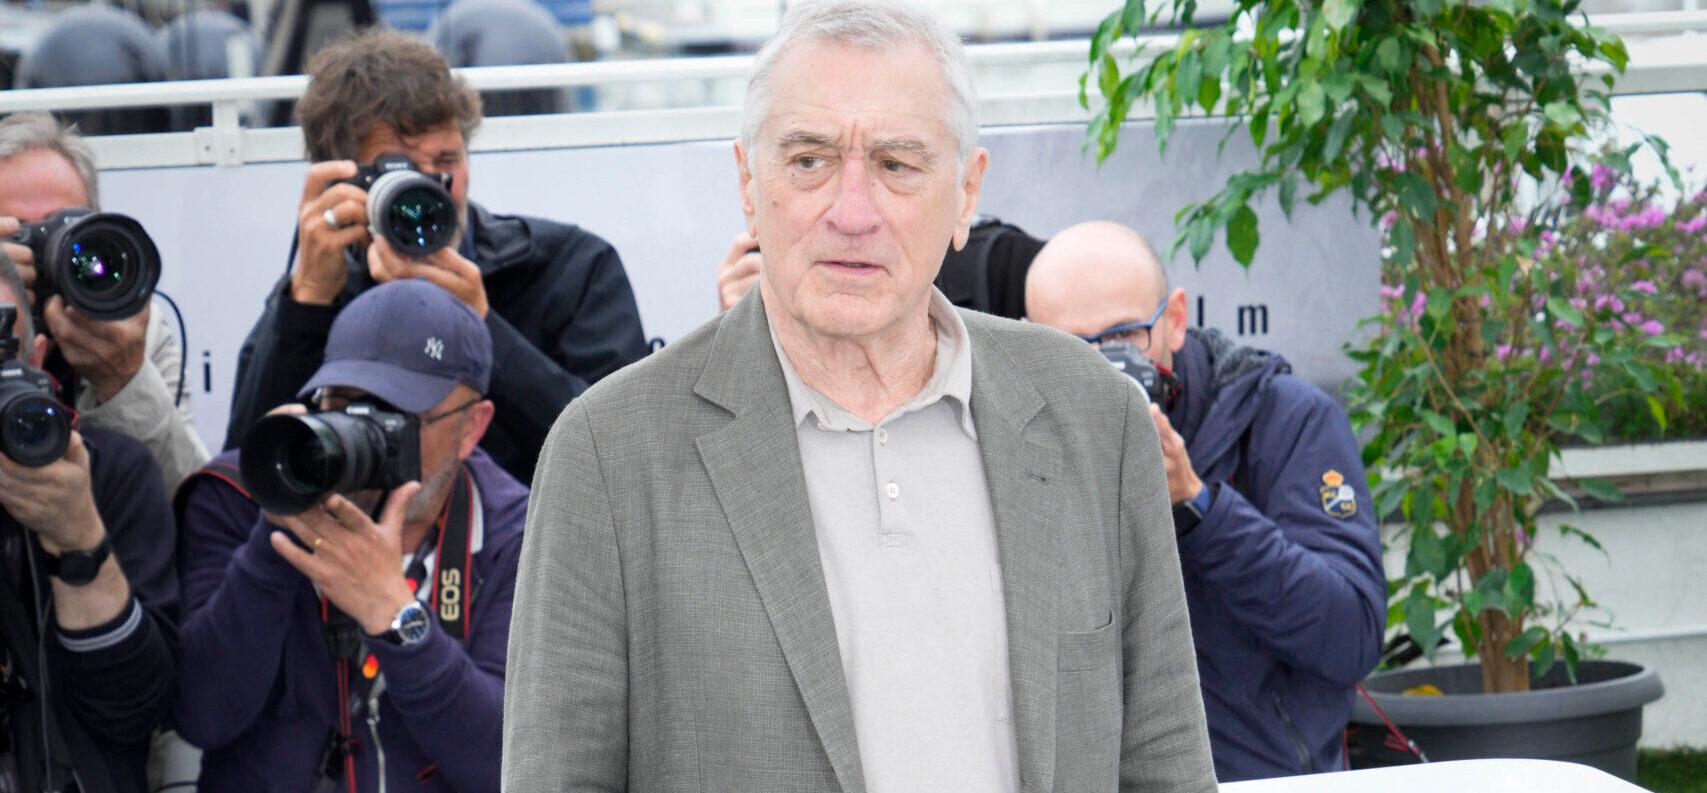 Robert De Niro’s Company Ordered To Pay Ex-Assistant A Shocking $1.2 Million